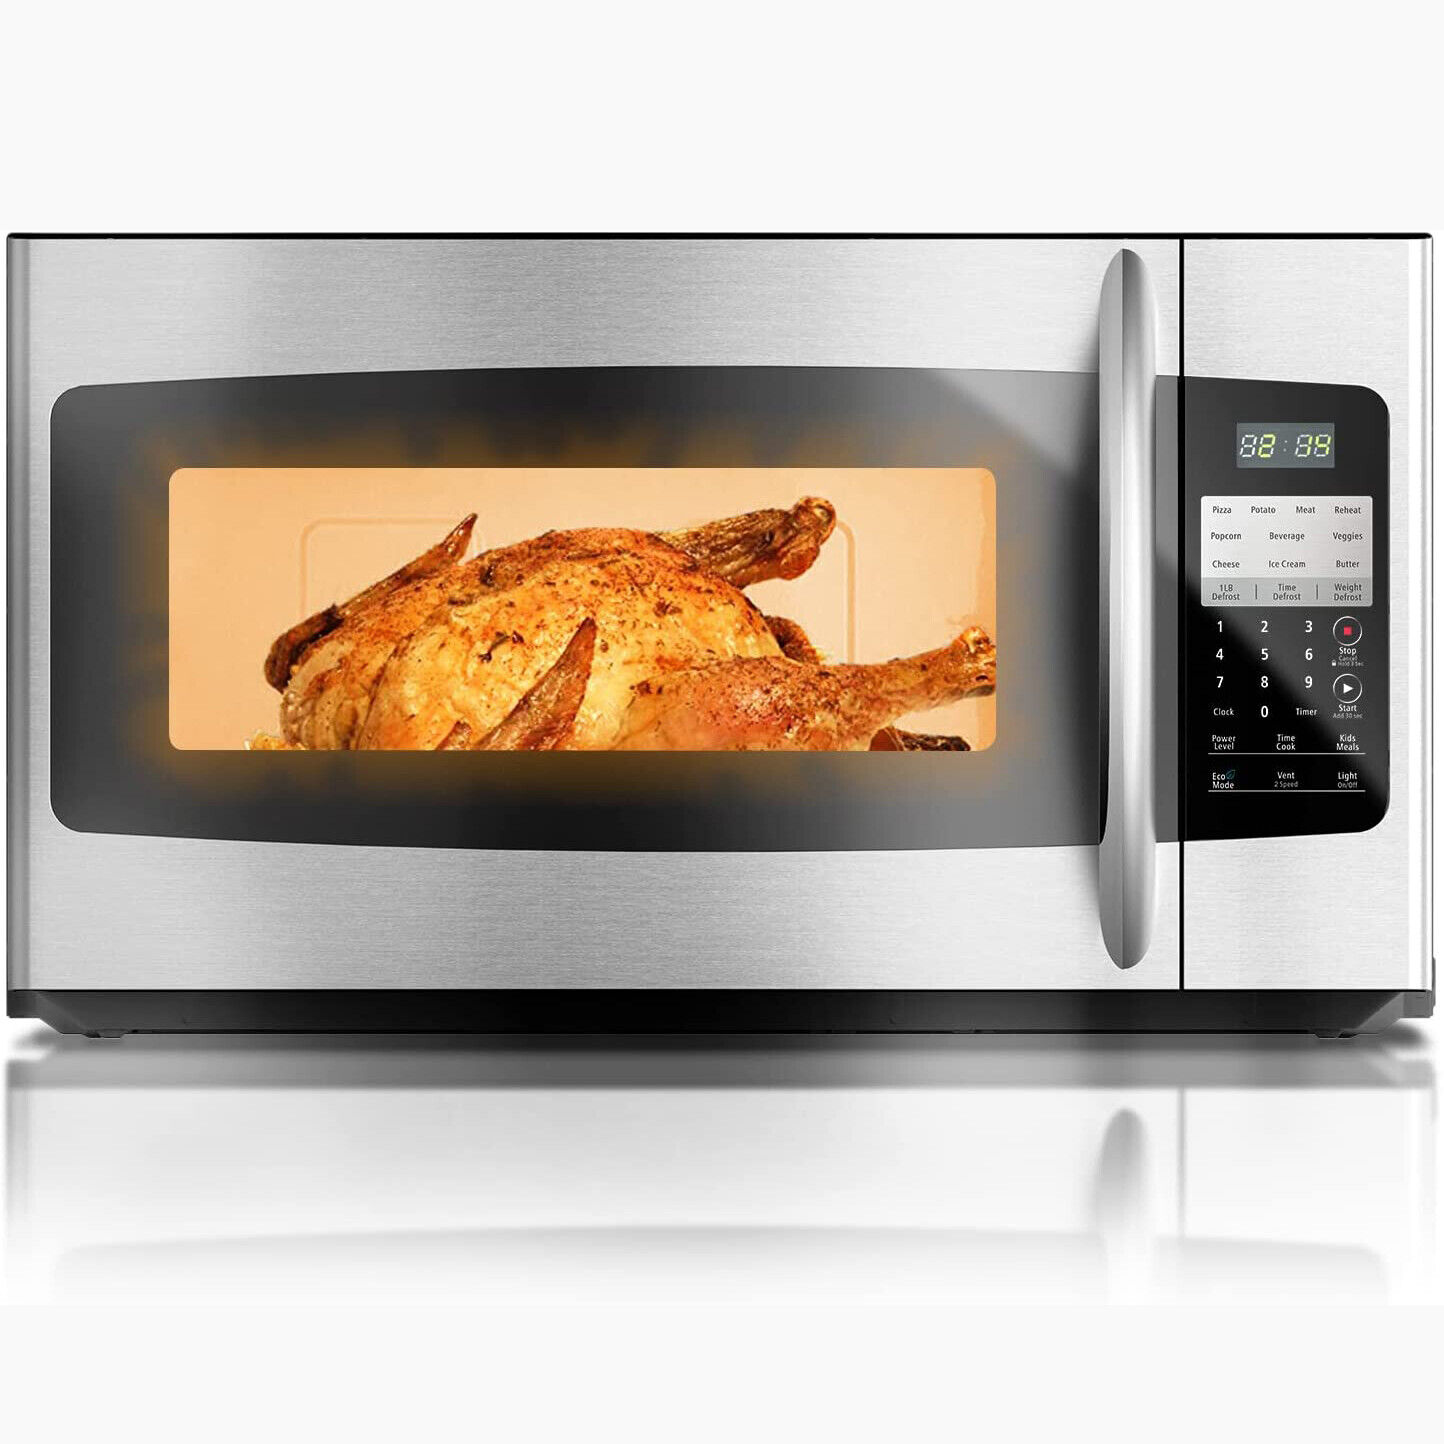 Smad 1.6 Cu.ft Microwave Oven Over The Range Stainless Steel Black Smart Oven